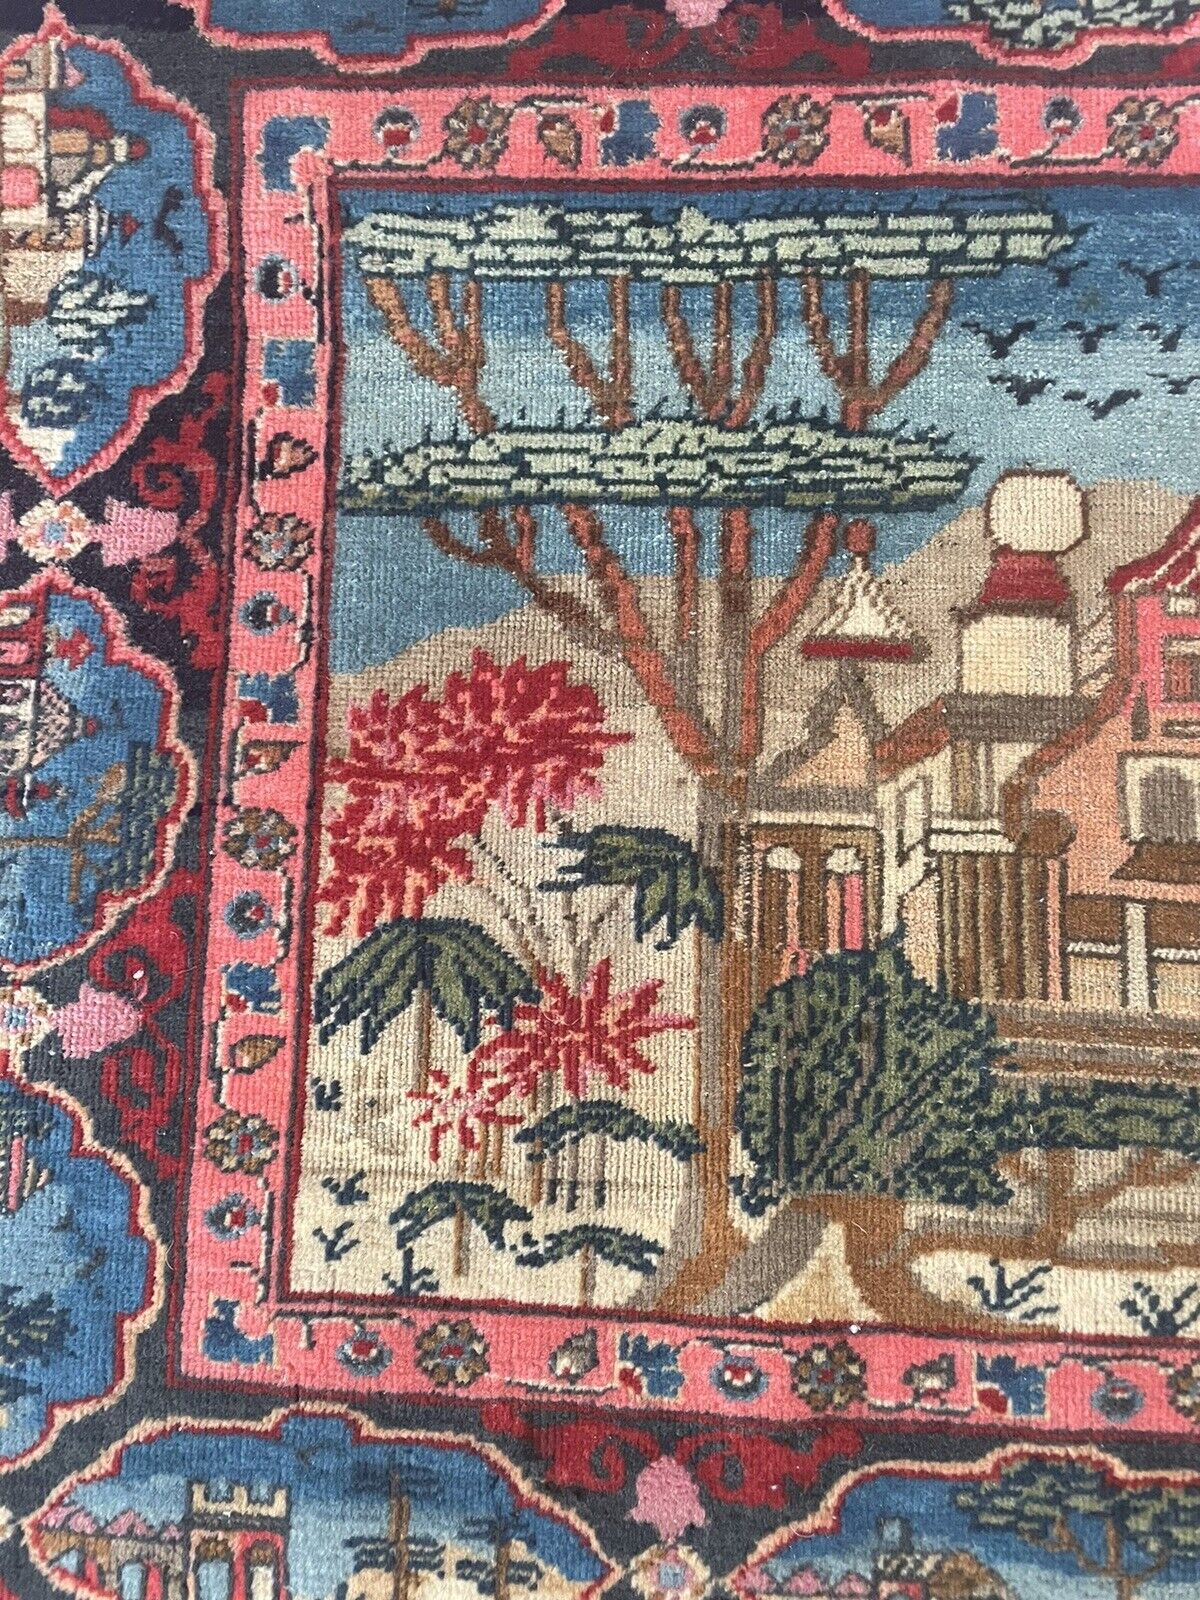 Close-up of historical significance on Handmade Antique Persian Kashan Collectible Rug - Detailed view emphasizing the rug's historical significance as a rare gem from the 1880s, bridging the past and present.